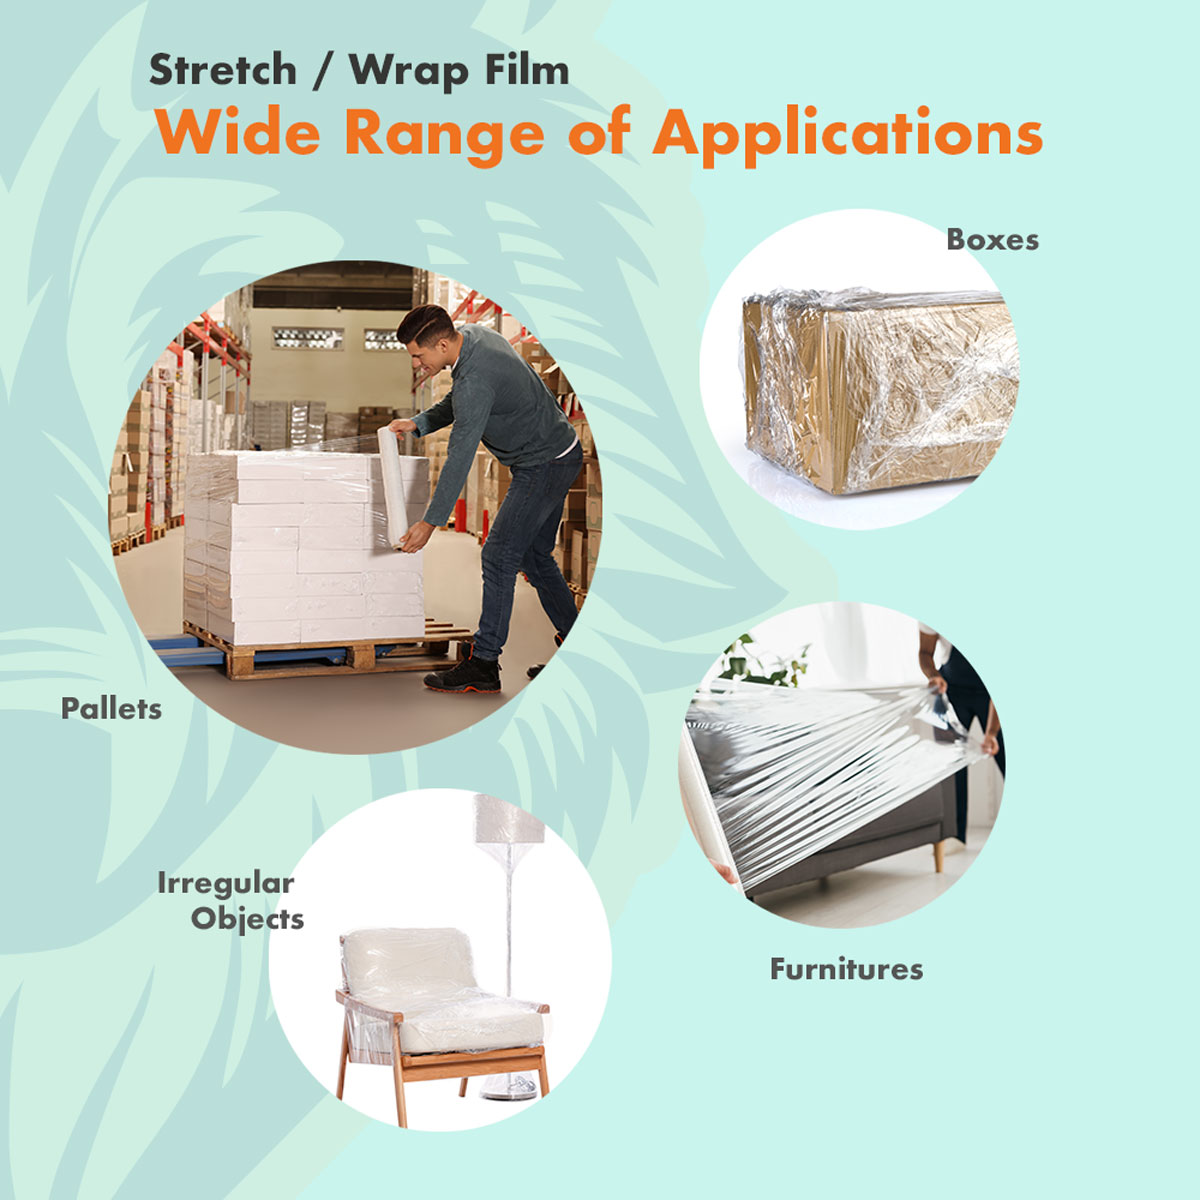 Applications for stretch / wrap film in wrapping boxes, furnitures, pallets and irregular objects